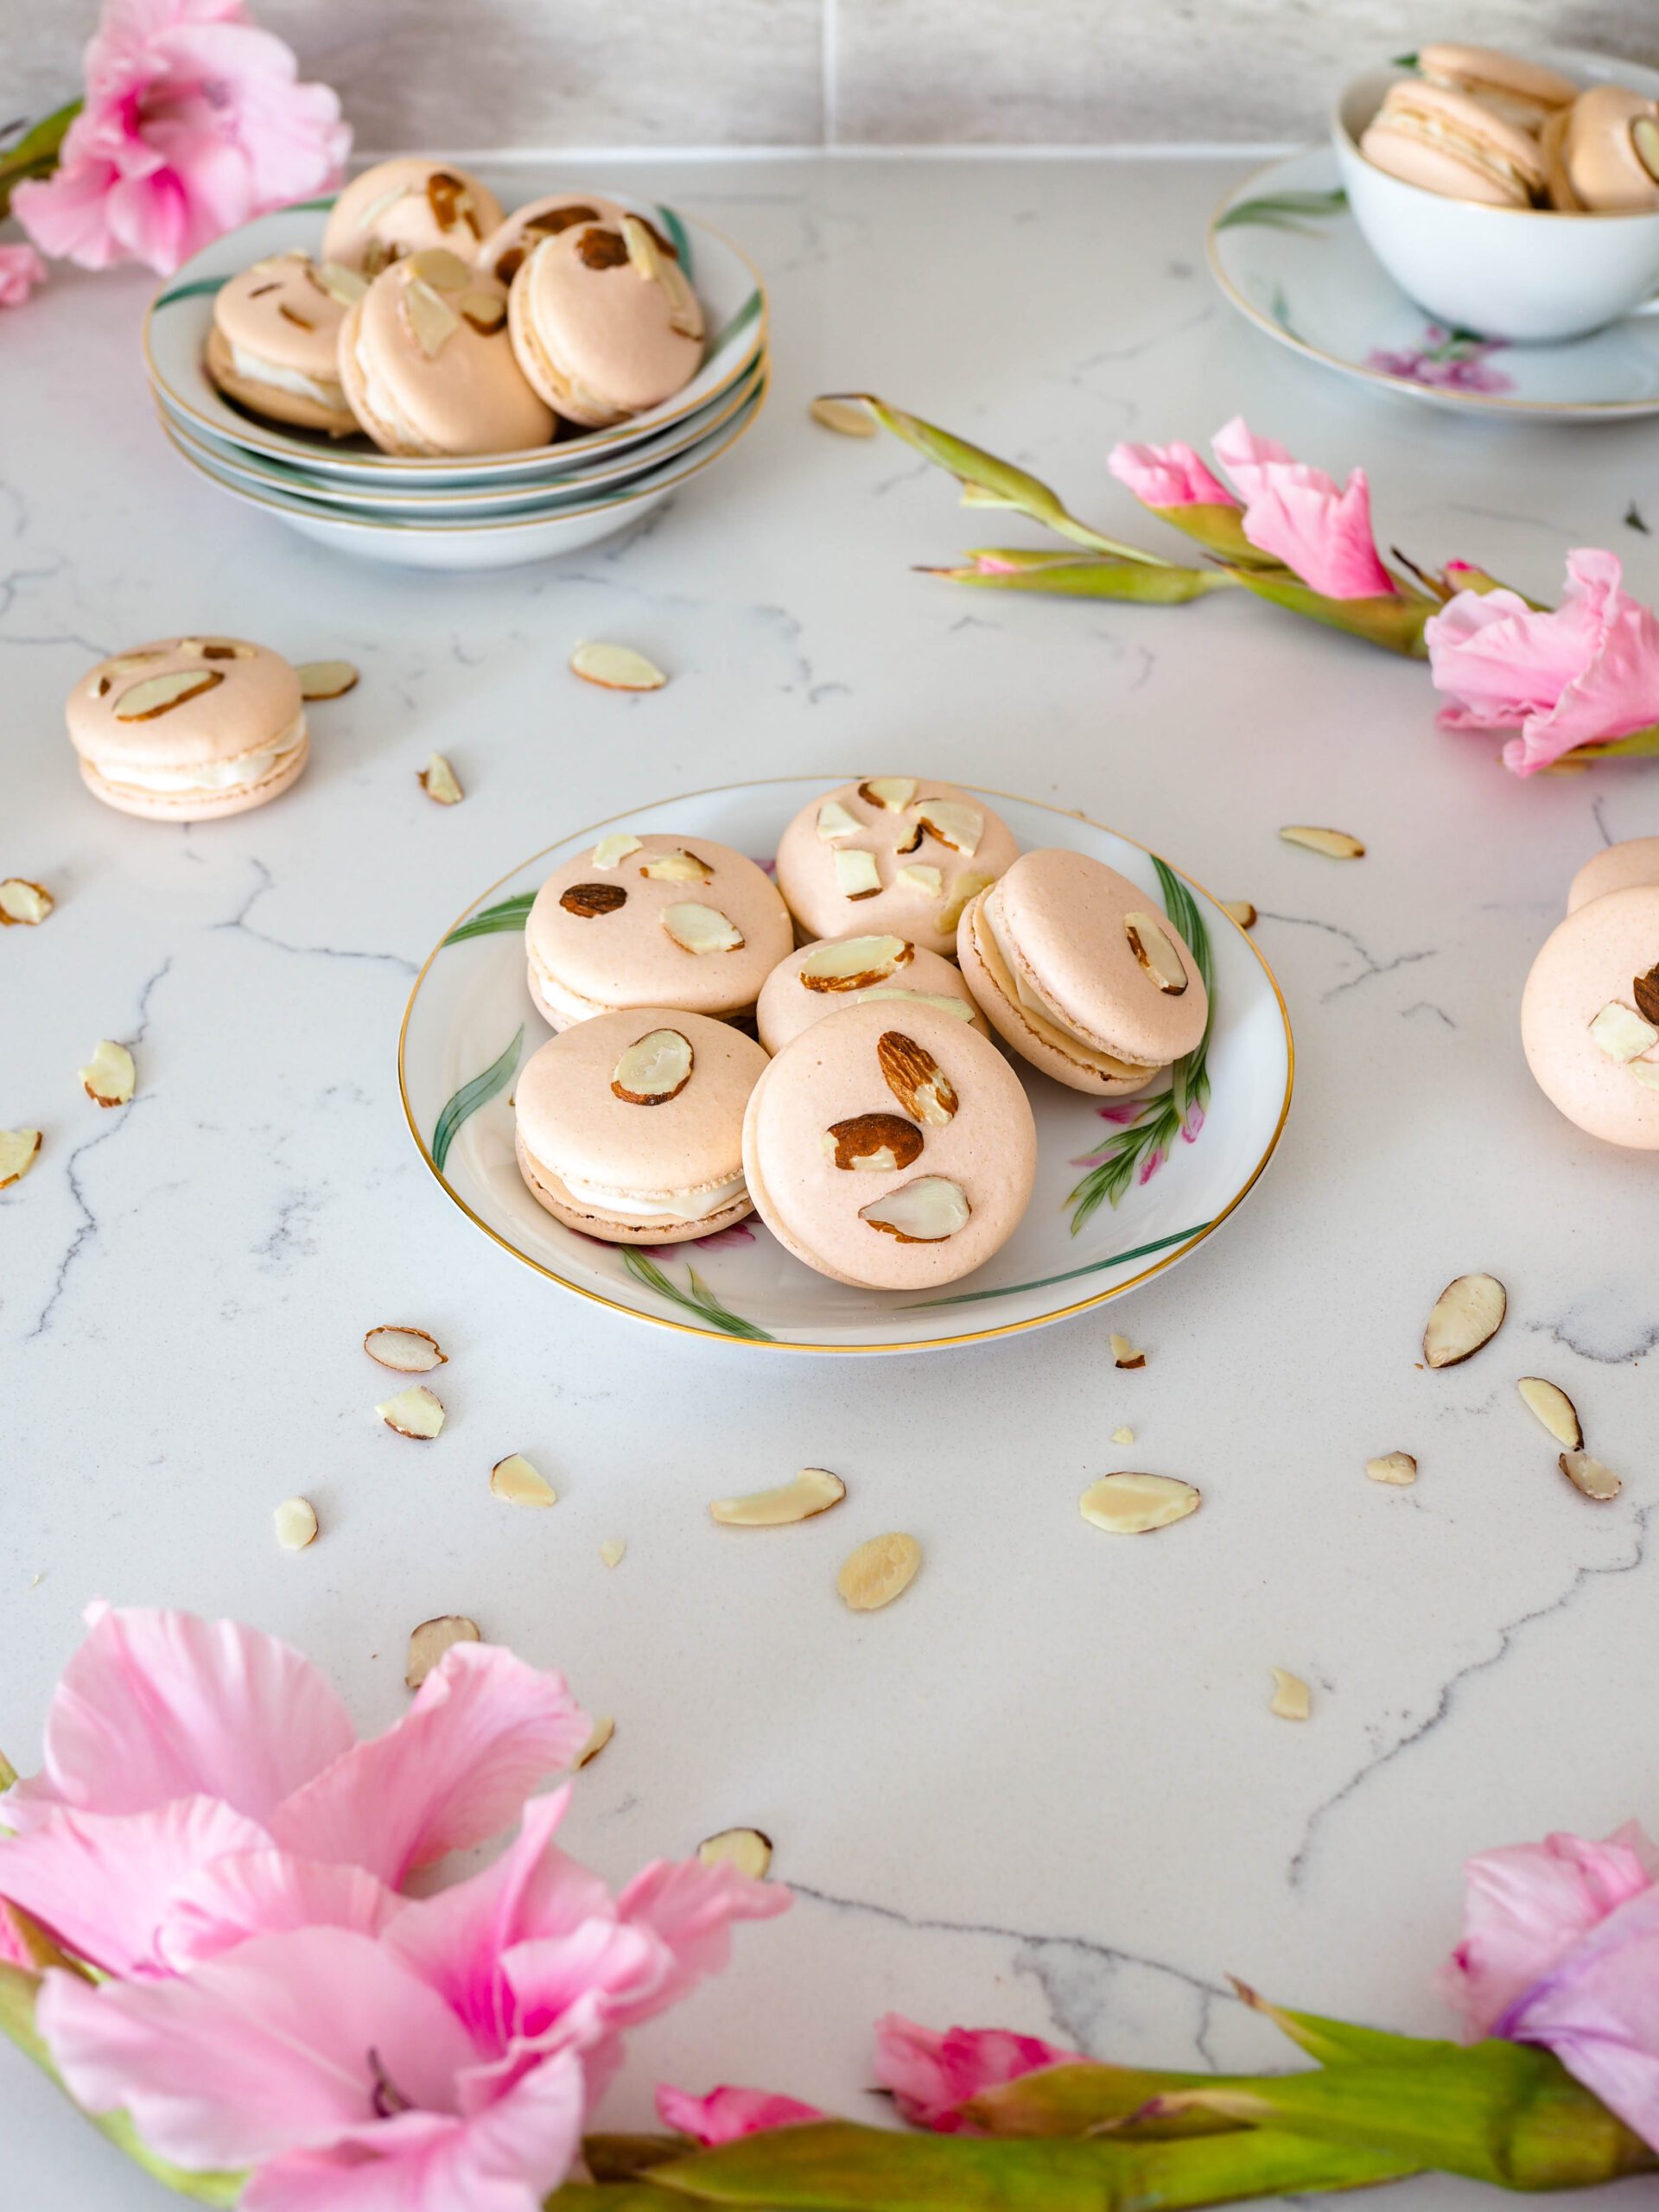 A handful of macarons is arranged on a china plate, with light pink gladiolus flowers and almond slivers surrounding them.